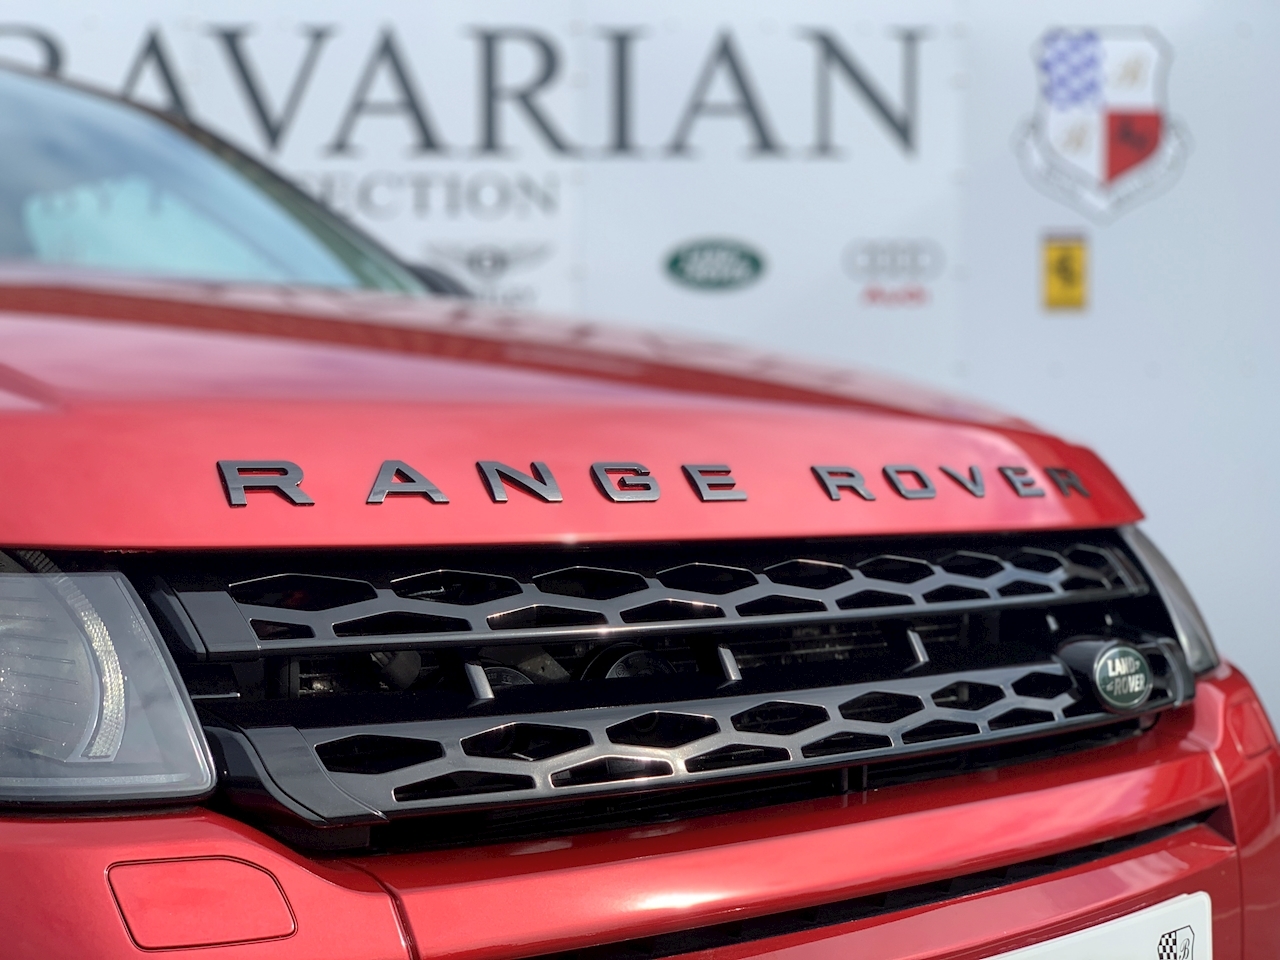 Range Rover Evoque 2.2 SD4 Dynamic Coupe 3dr Diesel Automatic 4X4 (153 g/km, 190 bhp)